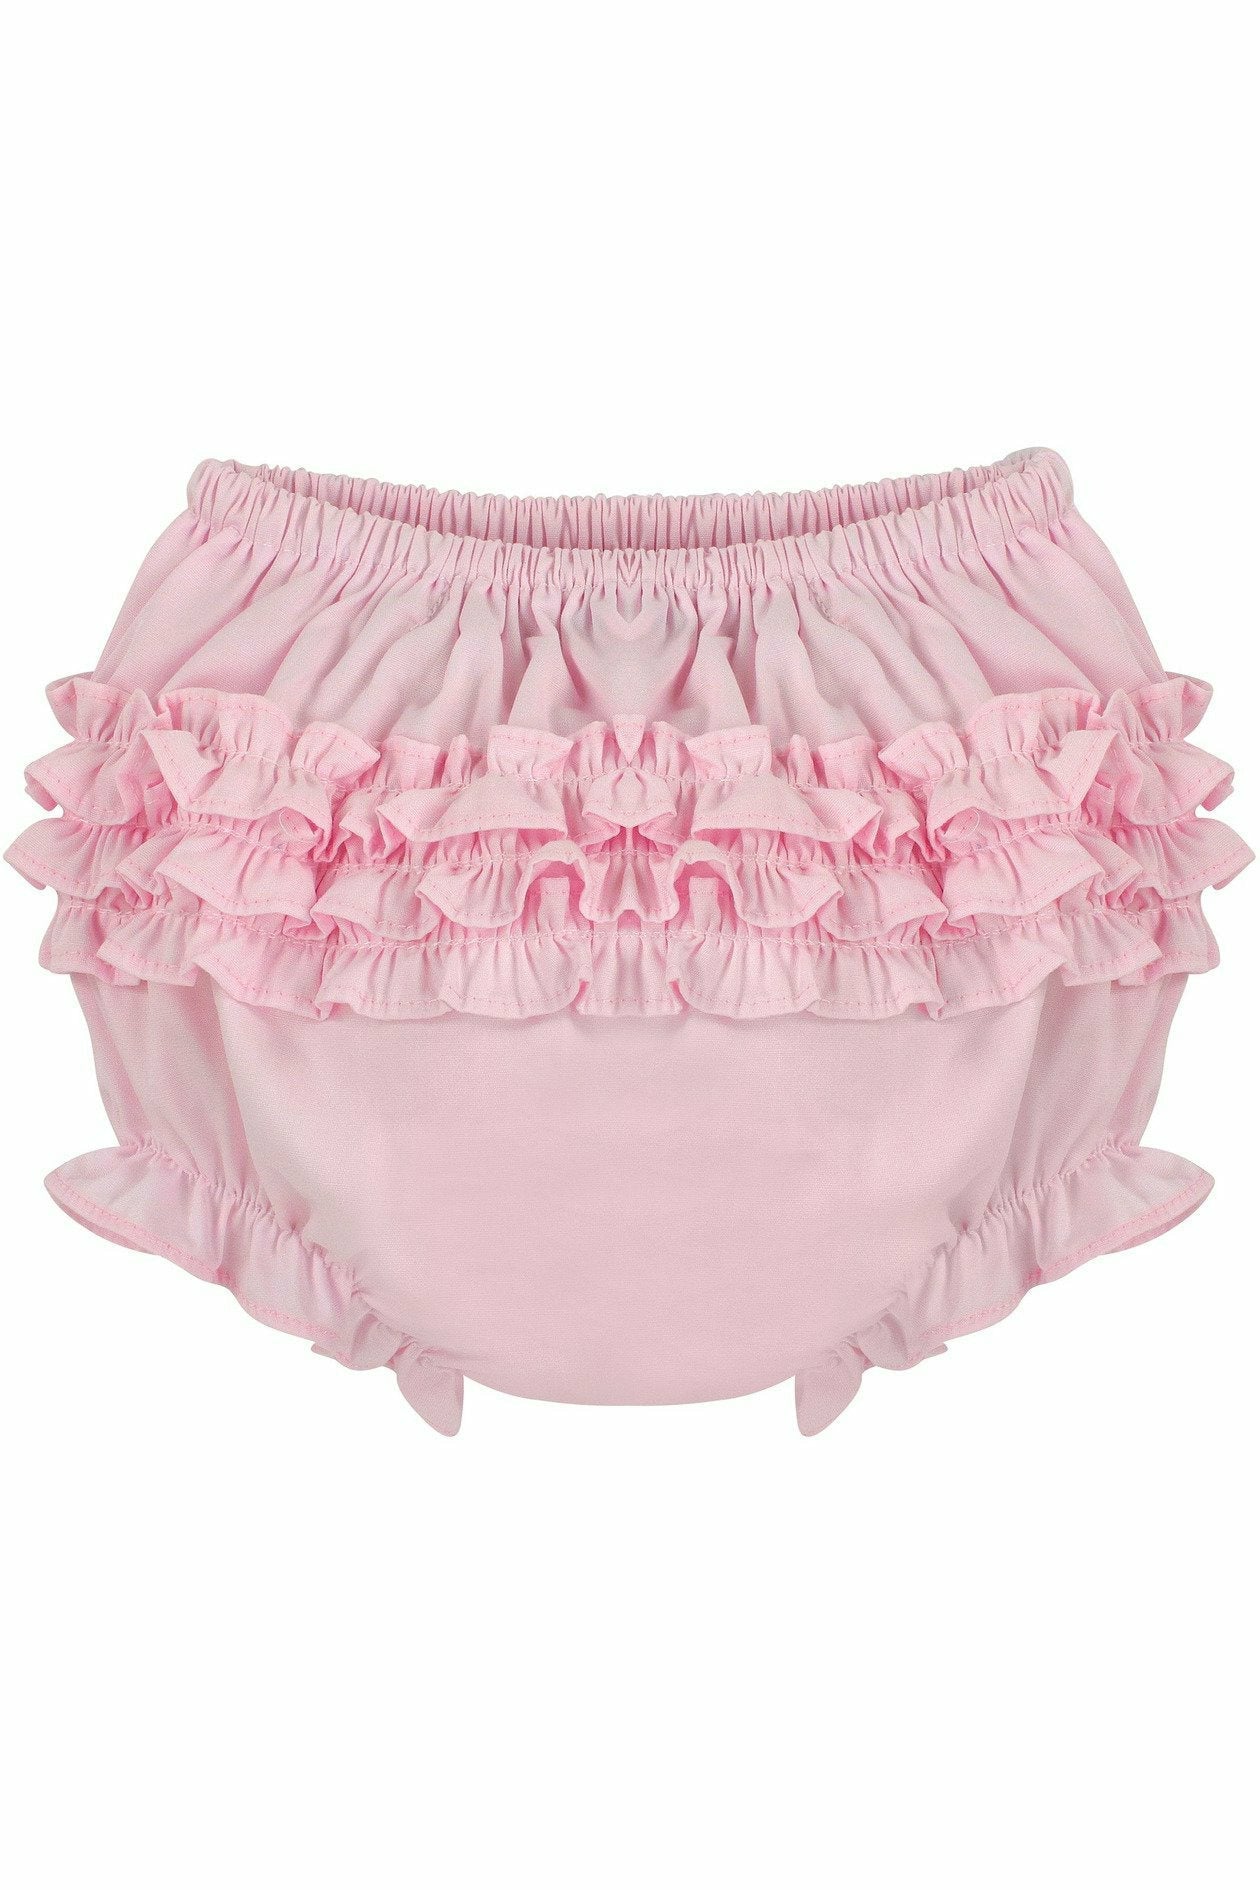 Soft Touch Baby Girls Frilly Nappy Cover Knickers, Frill Back Pants, Diaper  Covers (12-18 Months) : : Fashion